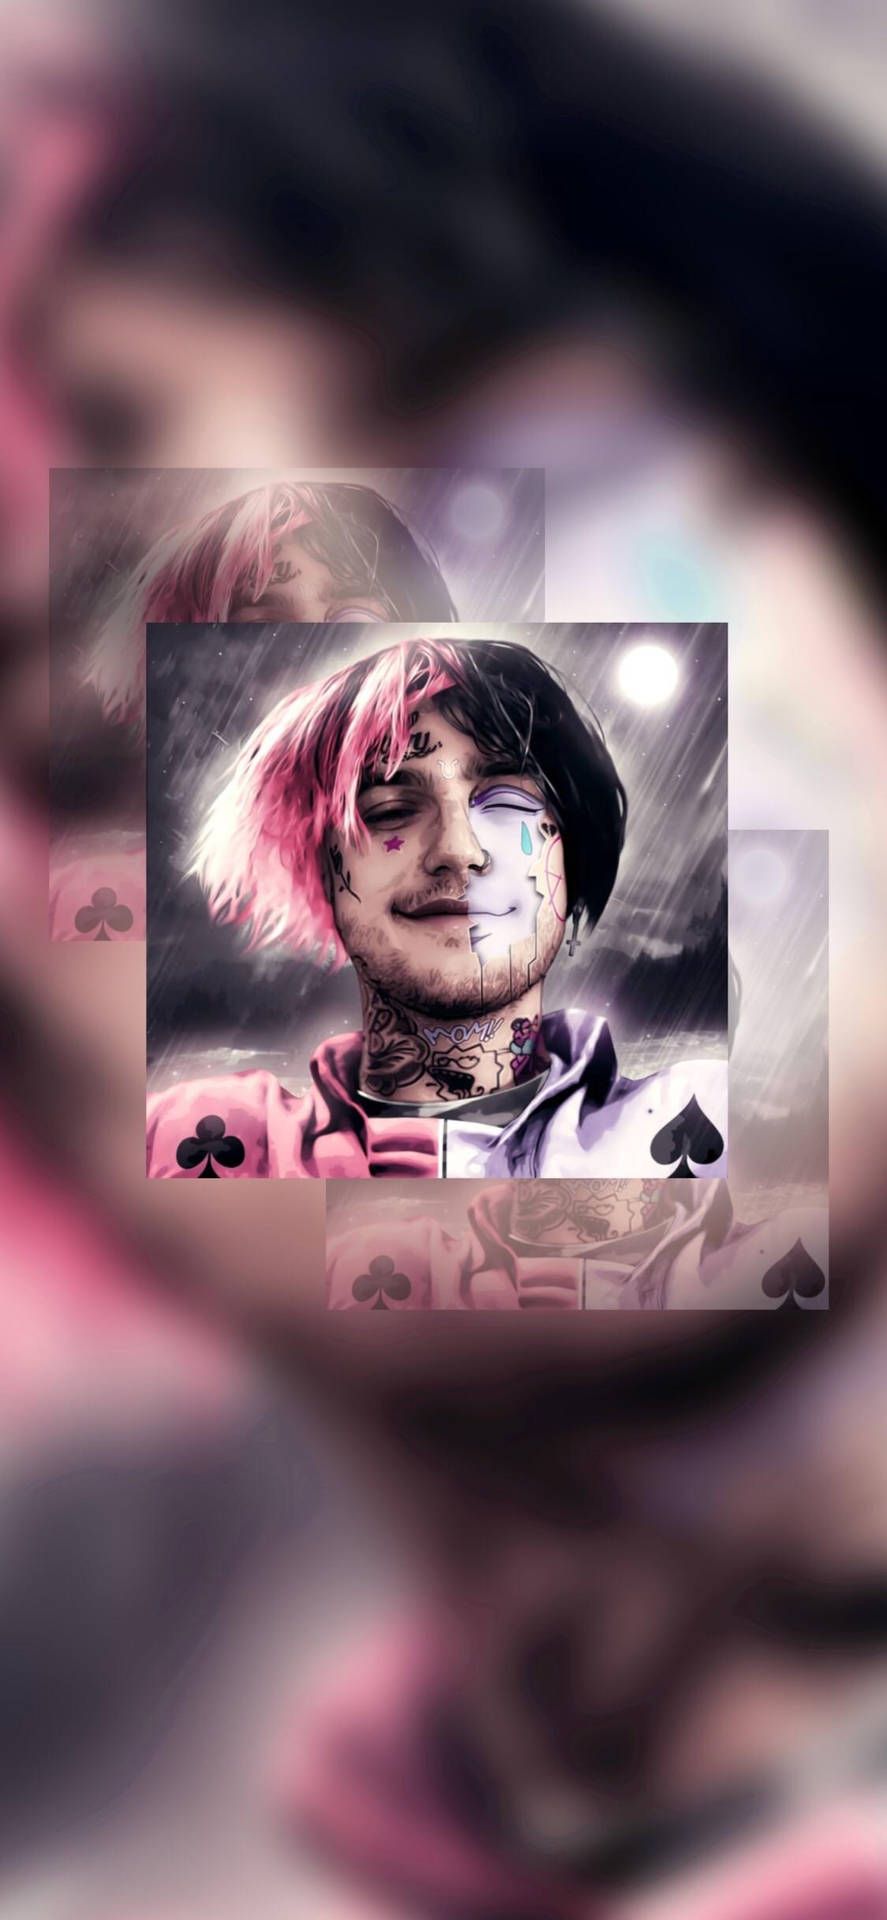 Download Cascaded Lil Peep Aesthetic Wallpaper